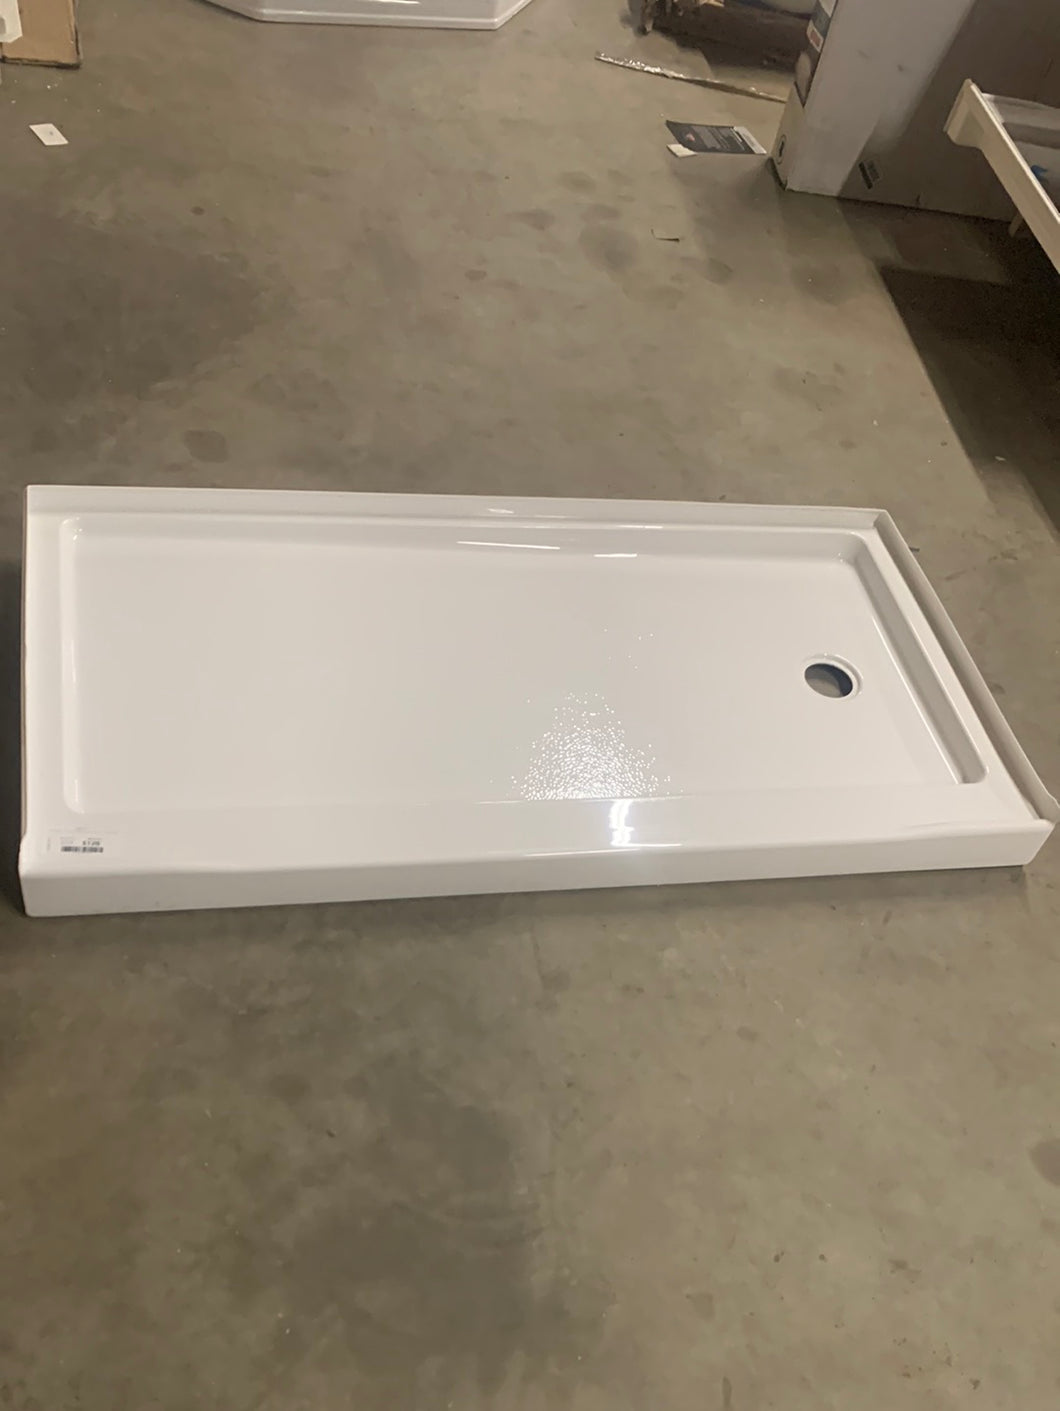 Classic 500 60 in. L x 30 in. W Alcove Shower Pan Base with Right Drain in High Gloss White